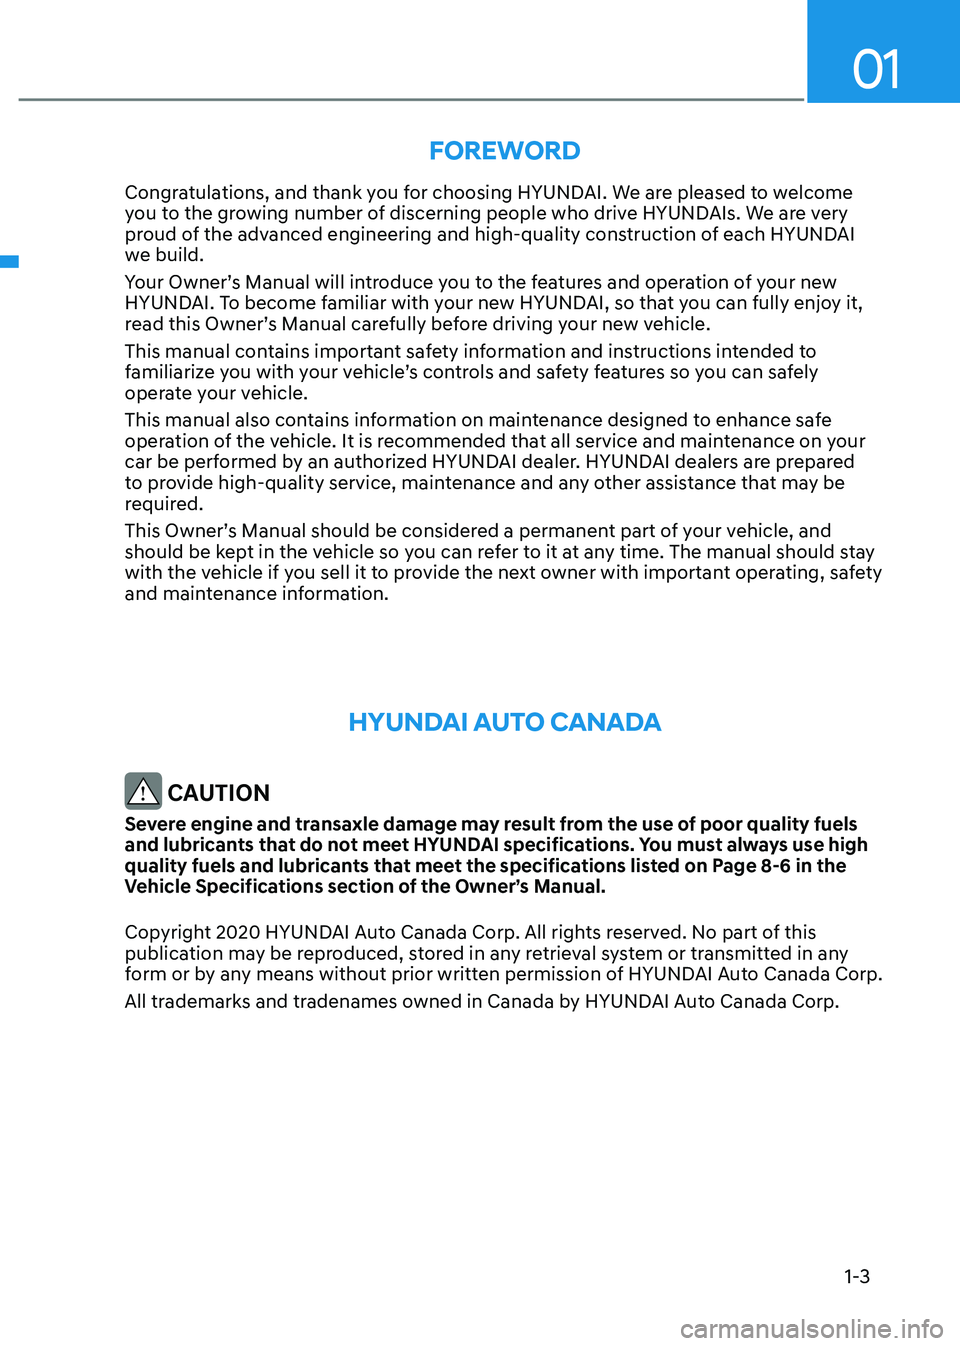 HYUNDAI KONA EV 2022  Owners Manual 01
1-3
Foreword
Congratulations, and thank you for choosing HYUNDAI. We are pleased to welcome  
you to the growing number of discerning people who drive HYUNDAIs. We are very 
proud of the advanced e